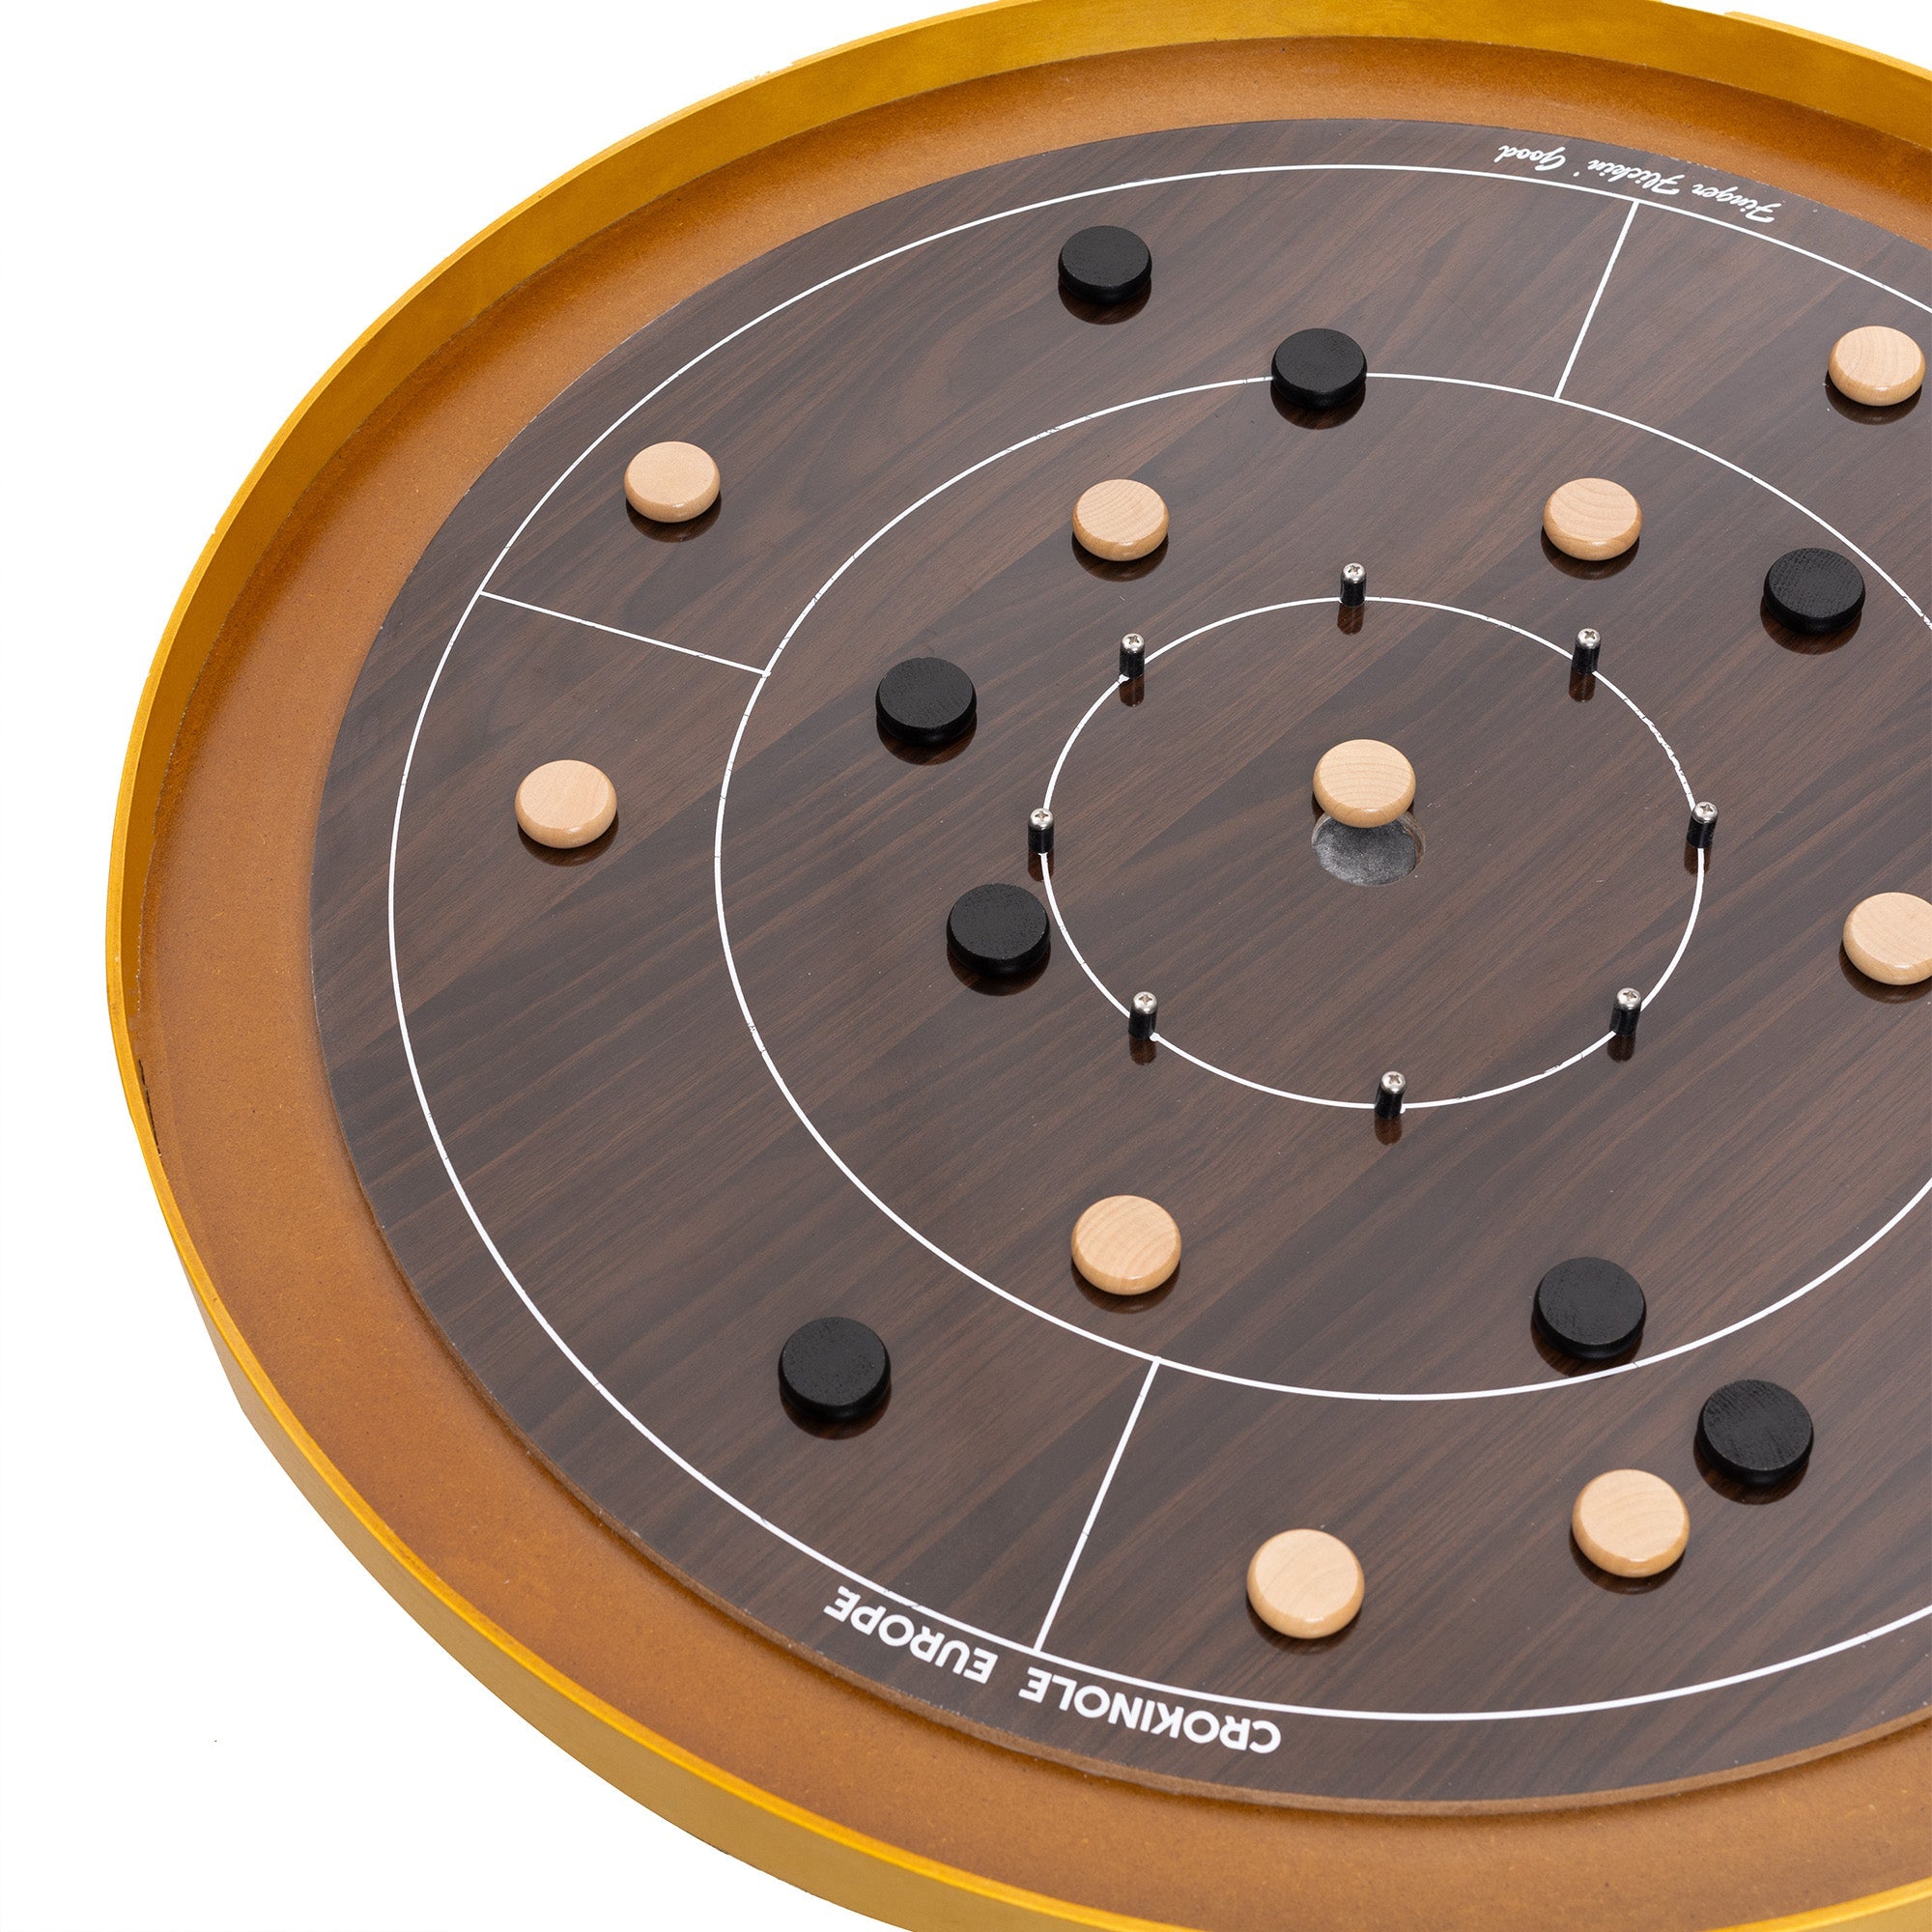 Crokinole Board Game - 'dark' Tournament Board, 26 Discs, Carrom Powder, Carrying Bag - Official Dimensions - Strategic Game for Young and Old - Buy Crokinole